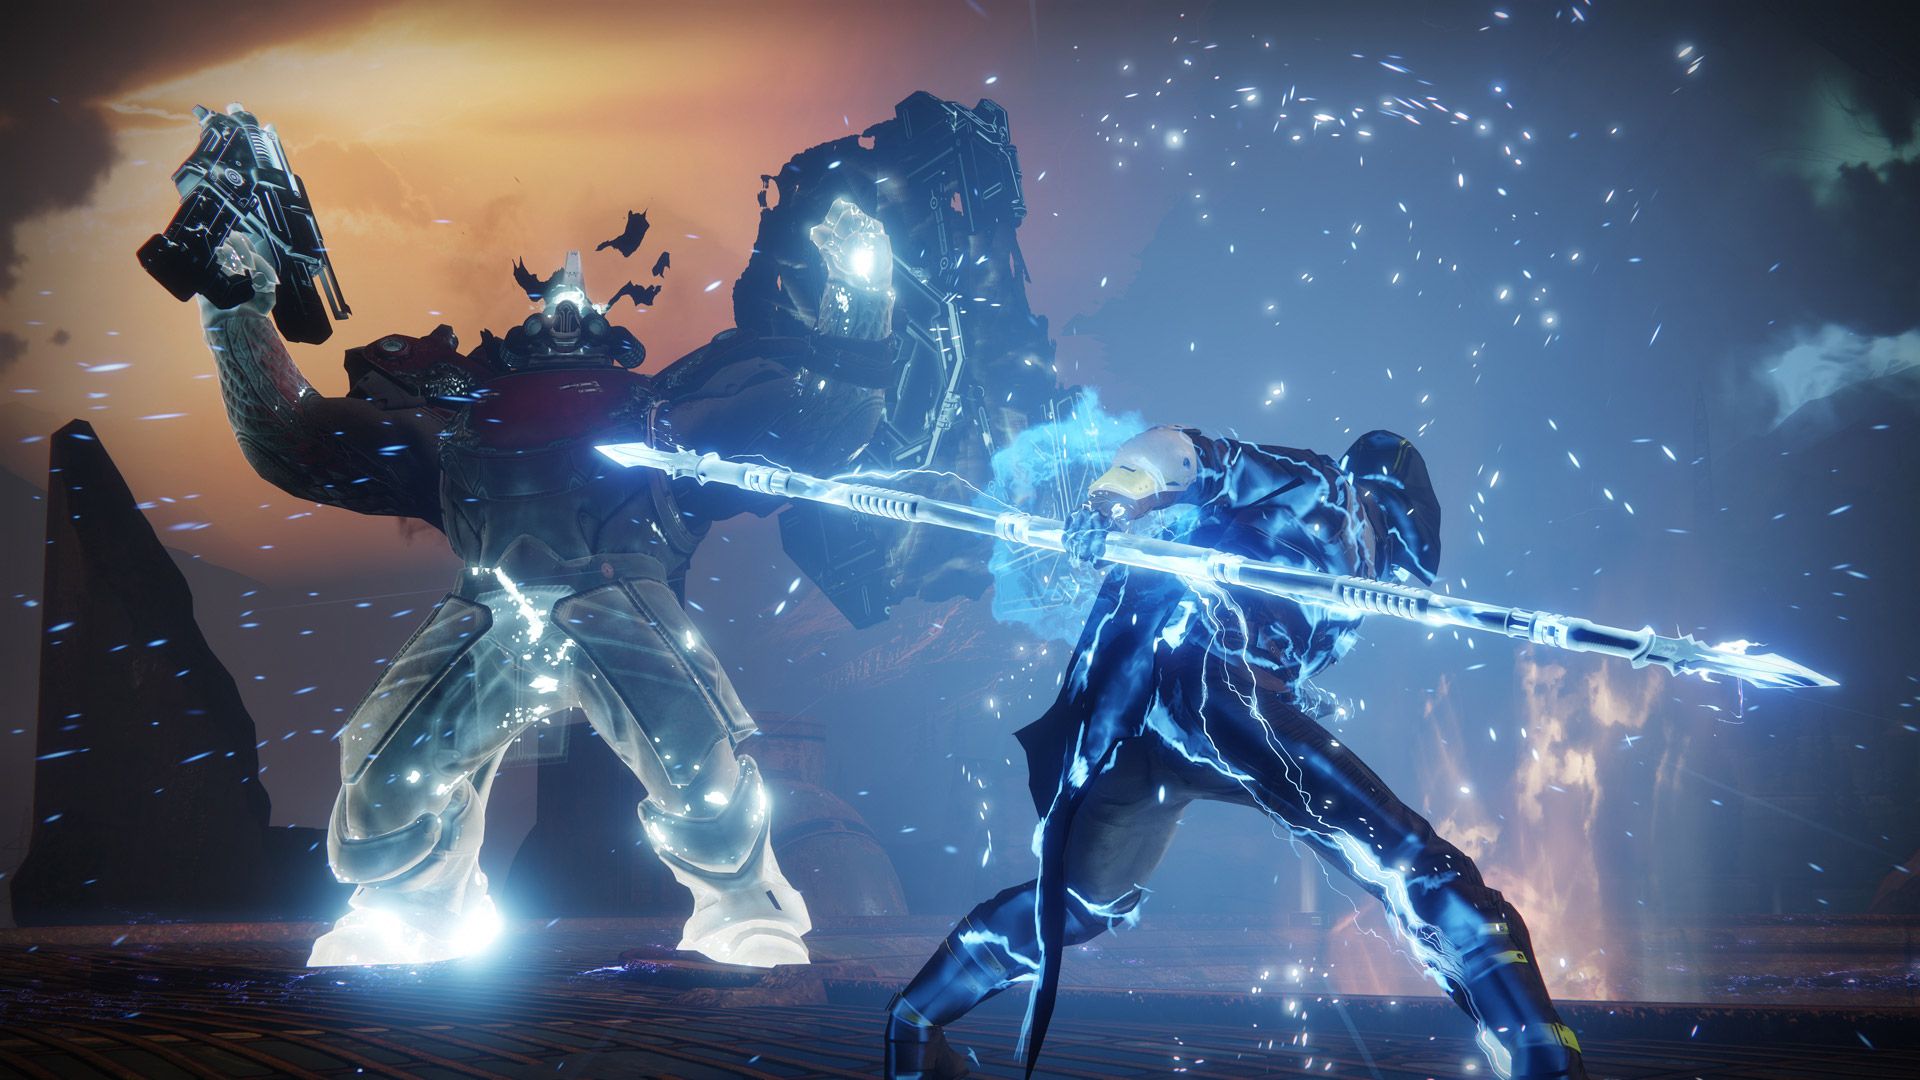 Video game screenshot of a blue, glowing sci-fi warrior swinging a staff against a large black-and-white enemy